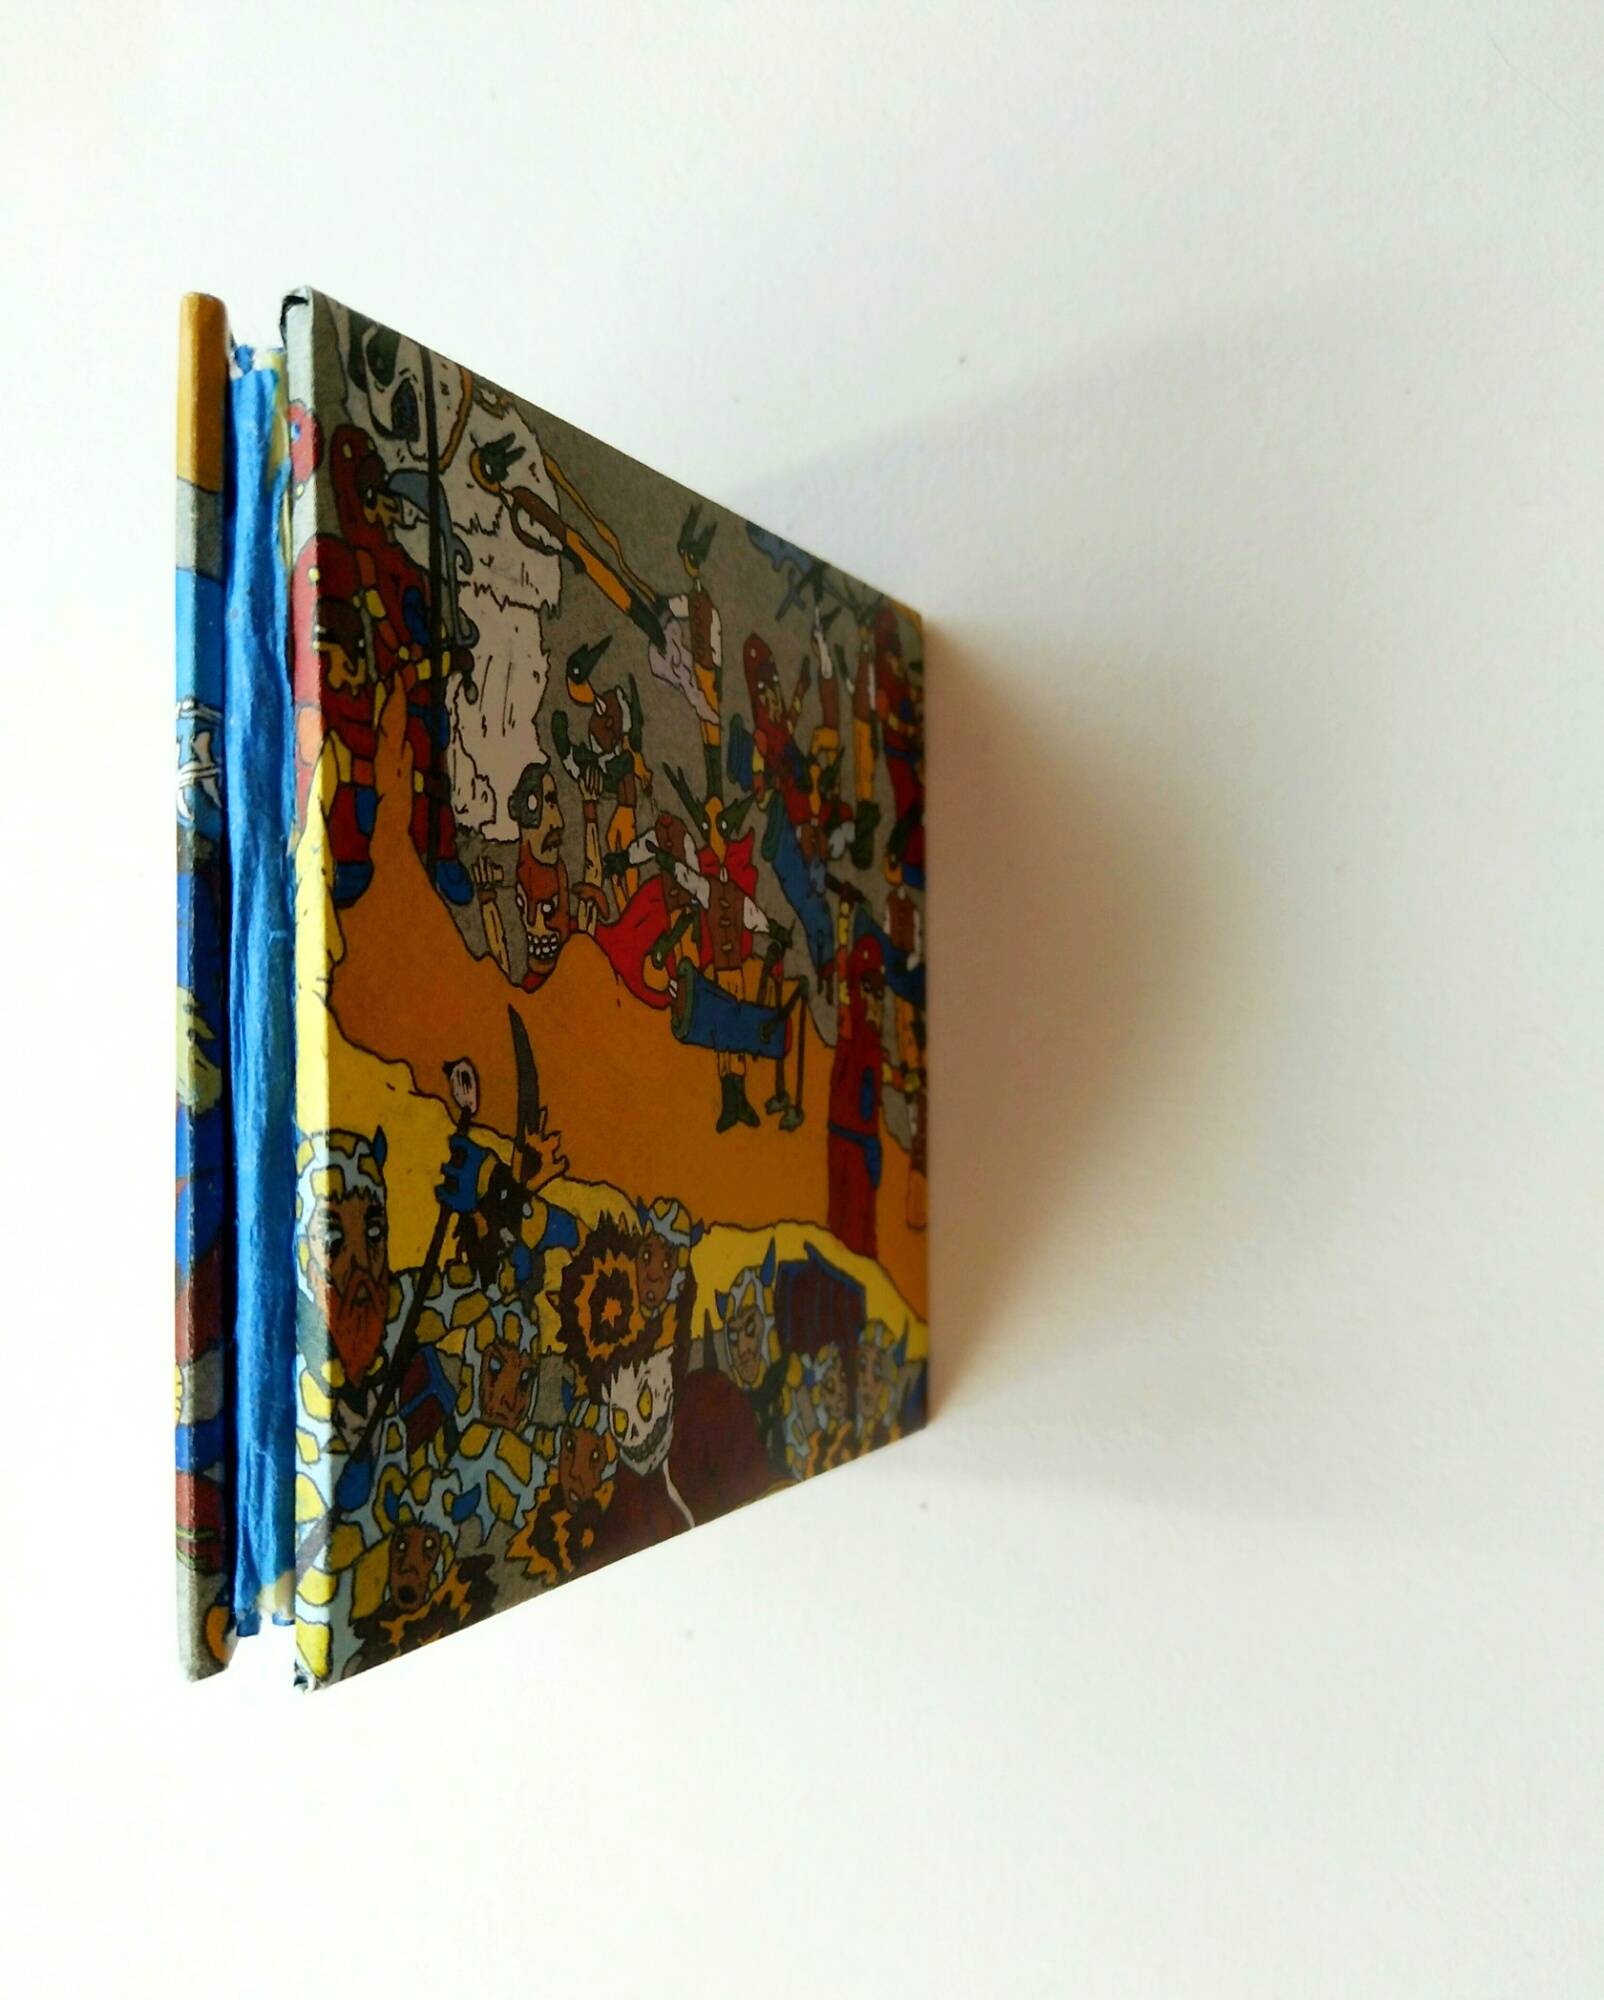 "Of Montreal" Artist Book